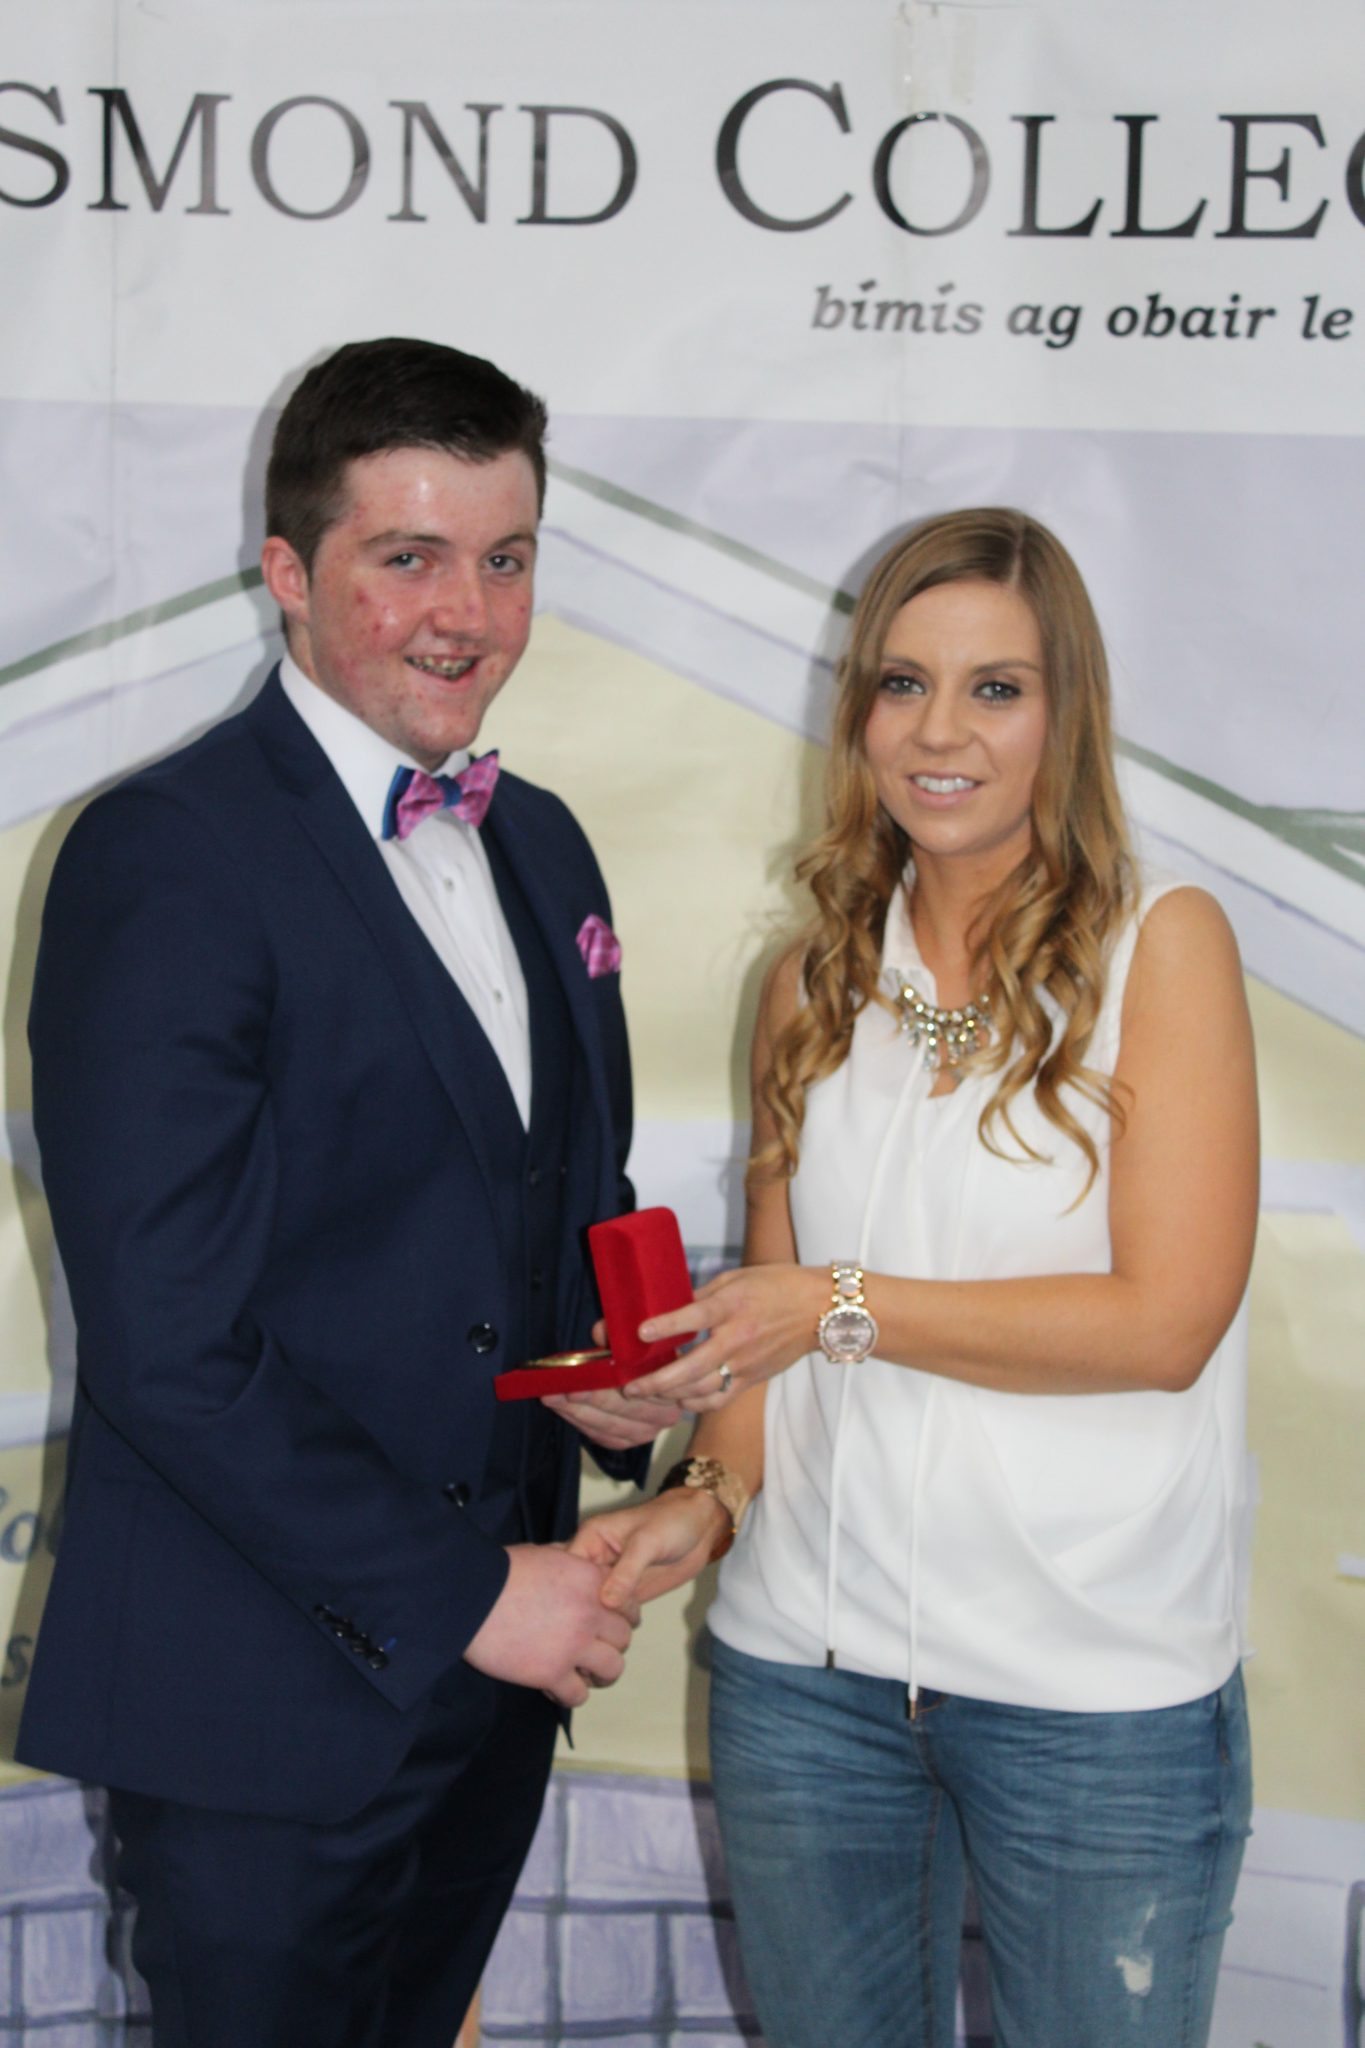 Desmond College Leaving Certificate Graduation 2015: Sports Awards: Padraig Collins with Ms Corkery